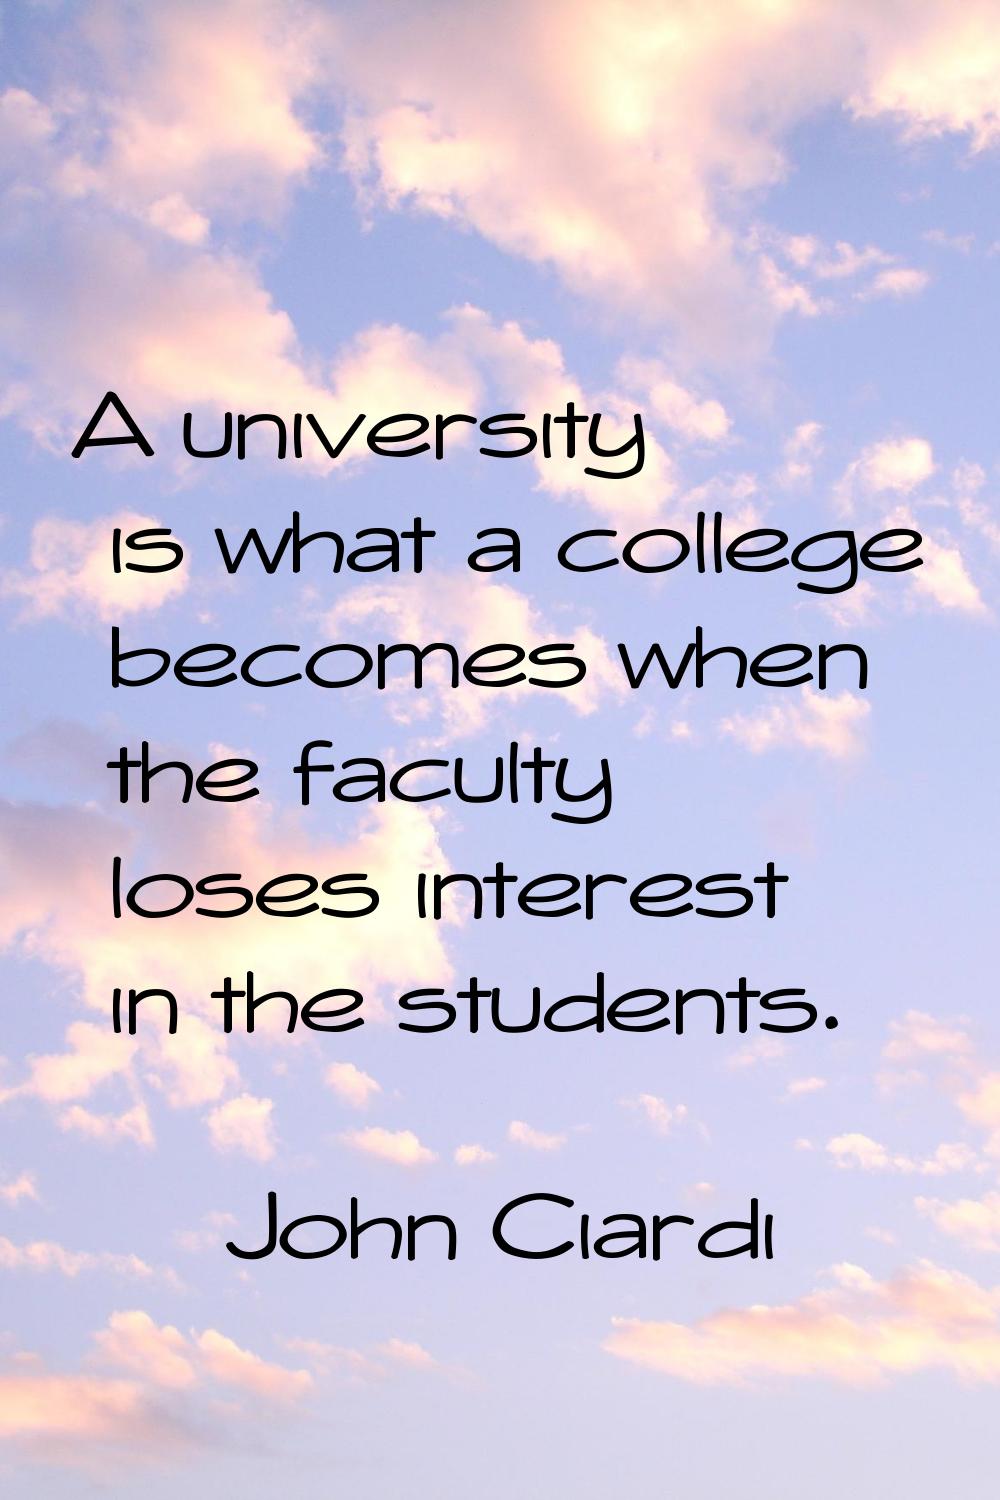 A university is what a college becomes when the faculty loses interest in the students.